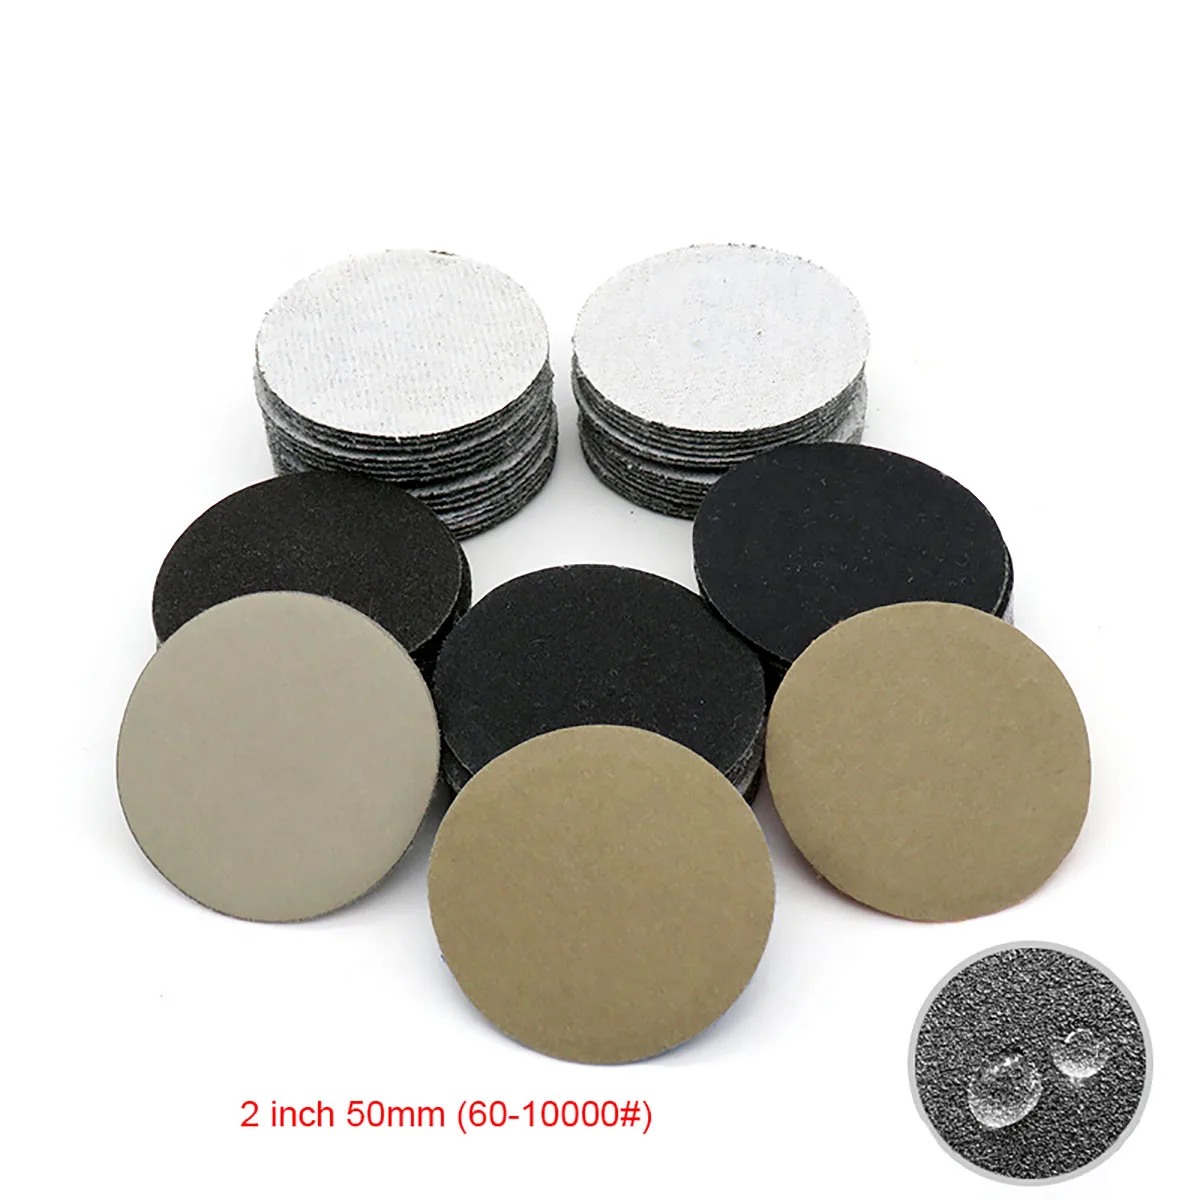 

20pcs 2 Inch 50mm 60 to 10000 Grit for Wet/Dry Polishing Waterproof Sanding Discs Hook Loop Silicon Carbide Abrasive Sandpaper